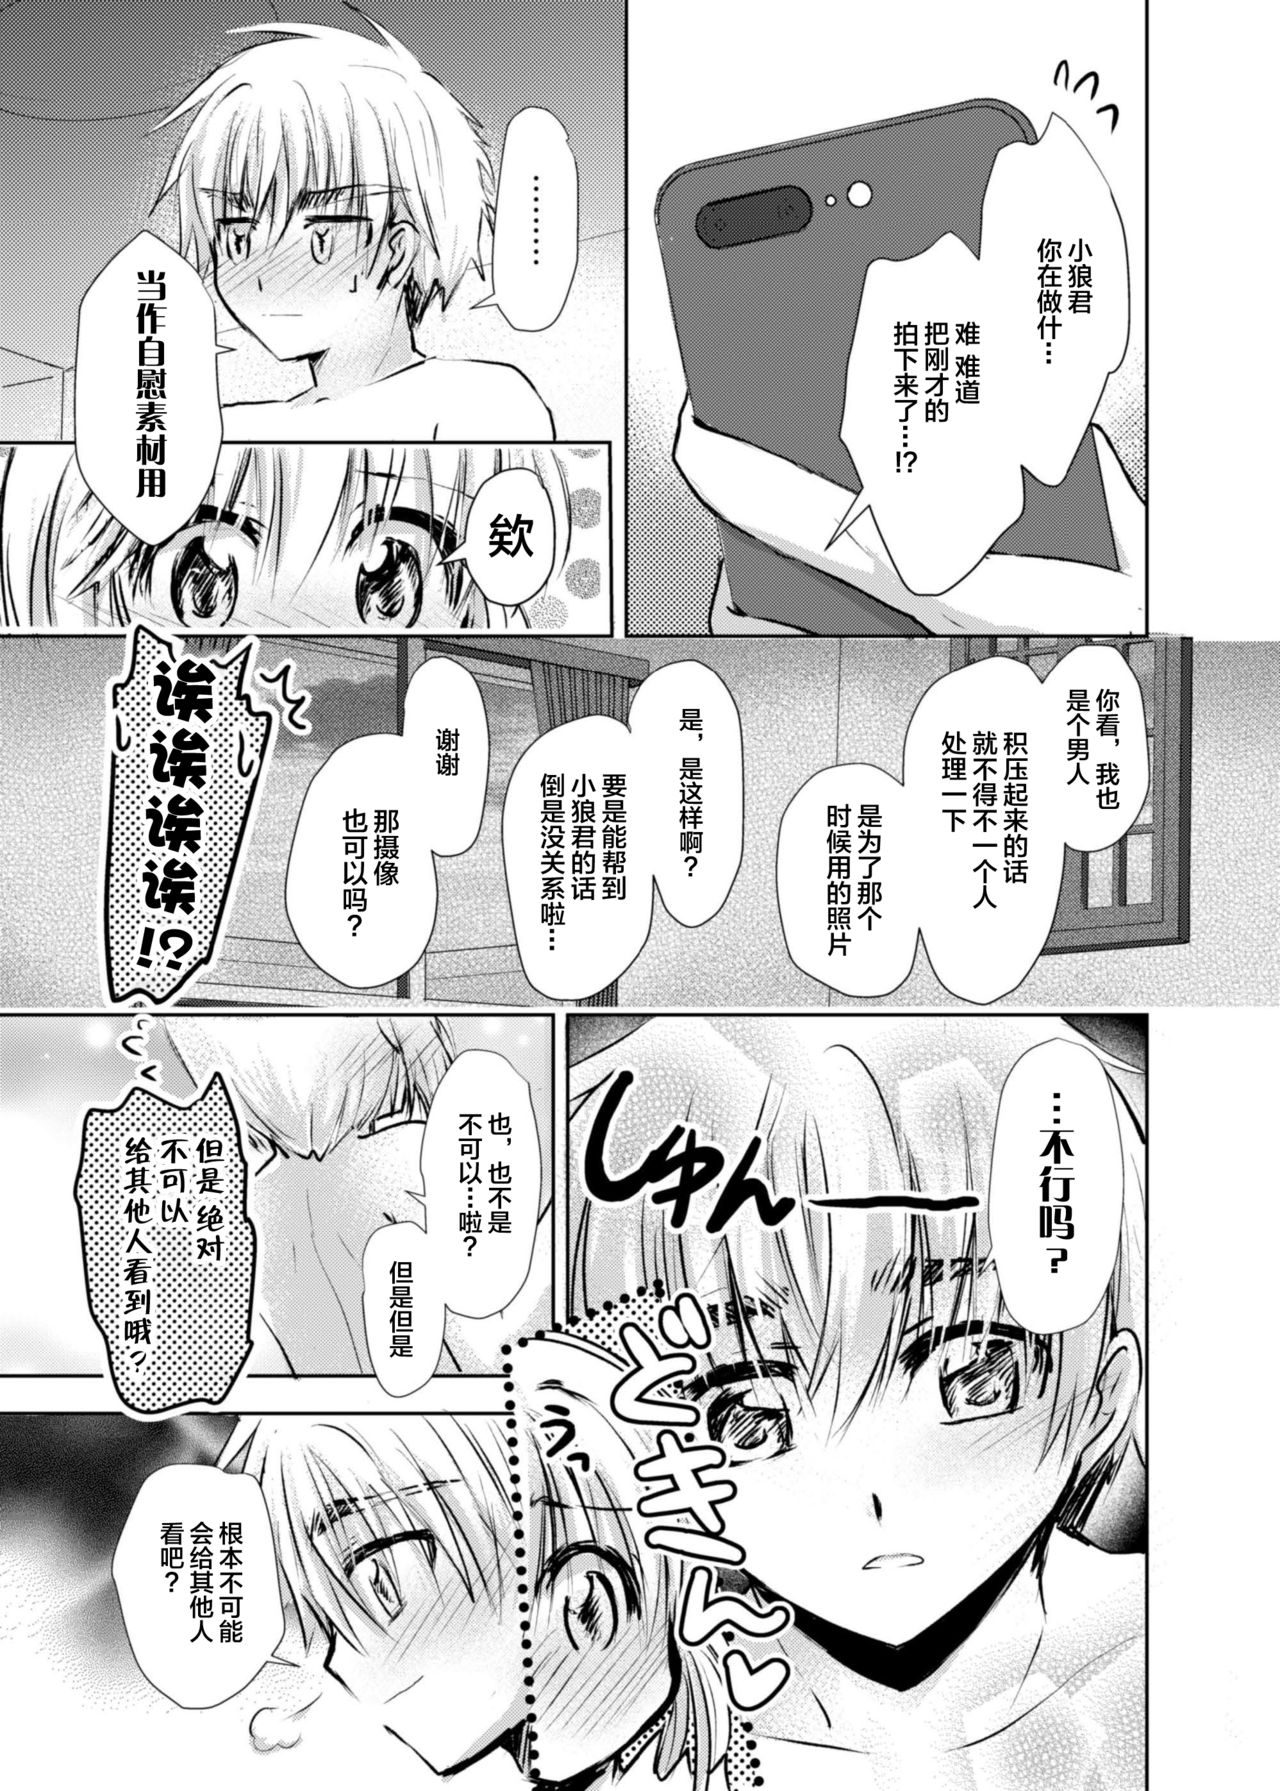 [Maple of Forest (Kaede Sago)] Give and Take (Cardcaptor Sakura) [Chinese] [新桥月白日语社] [Digital] page 10 full